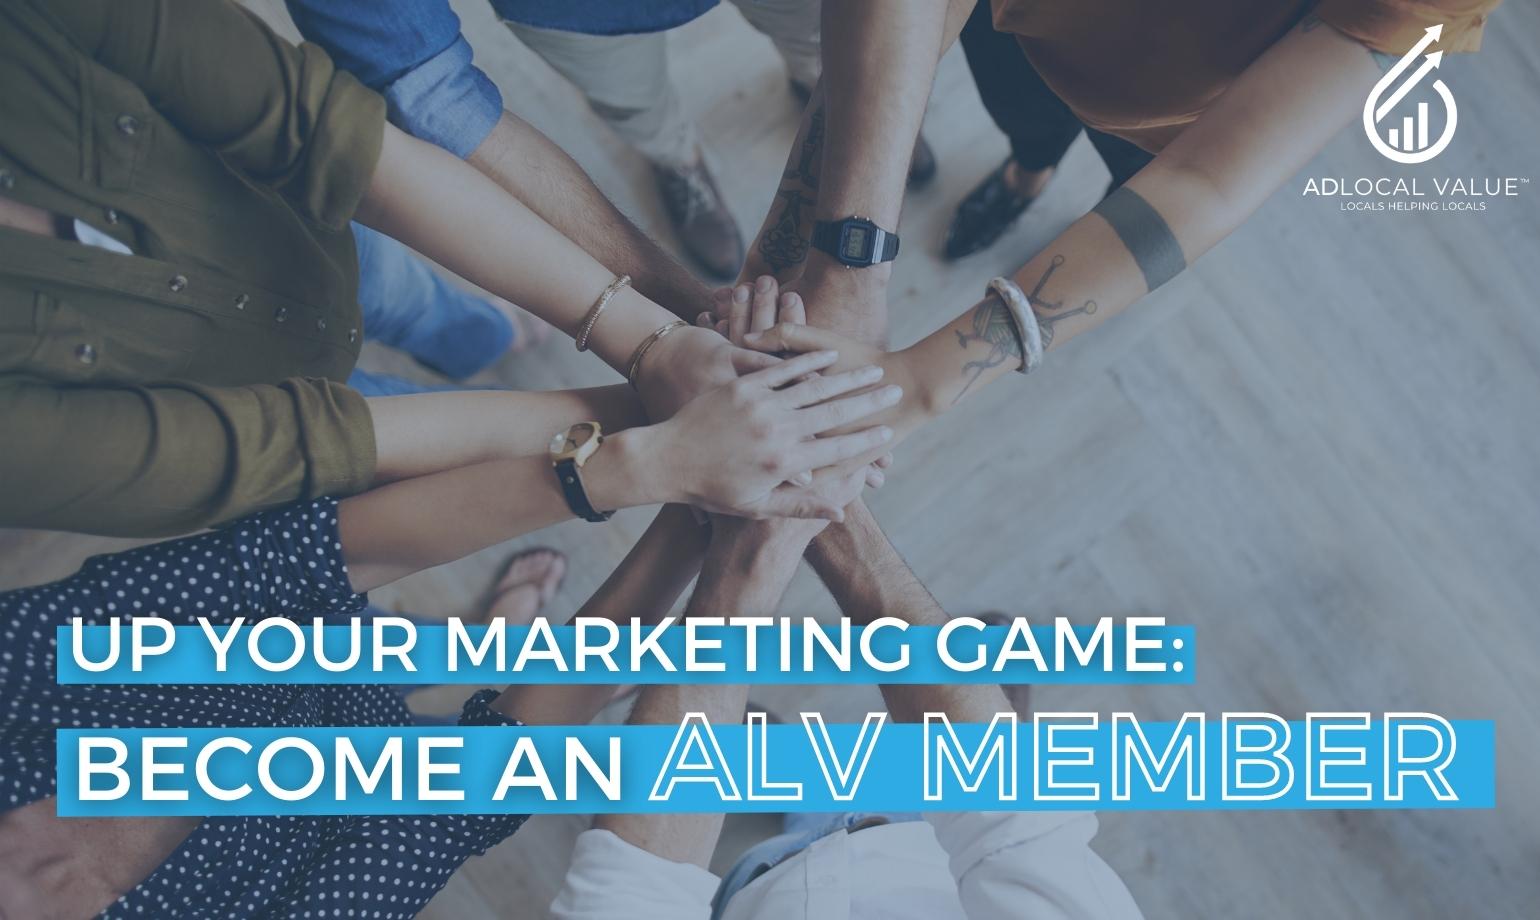 Up Your Marketing Game: Become an ALV Member